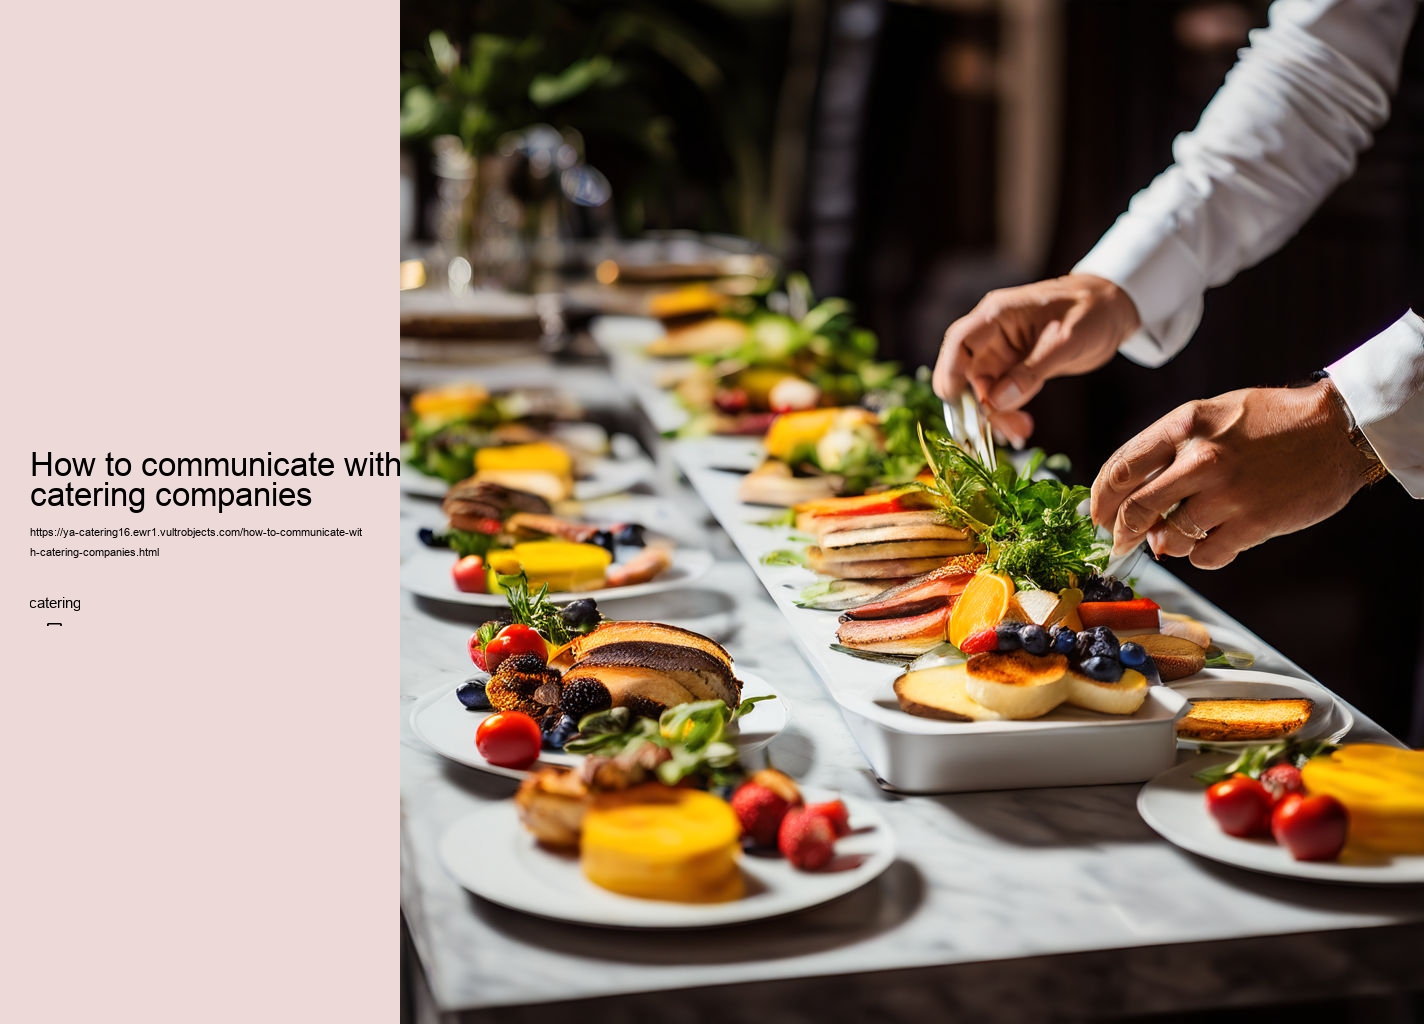 How to communicate with catering companies